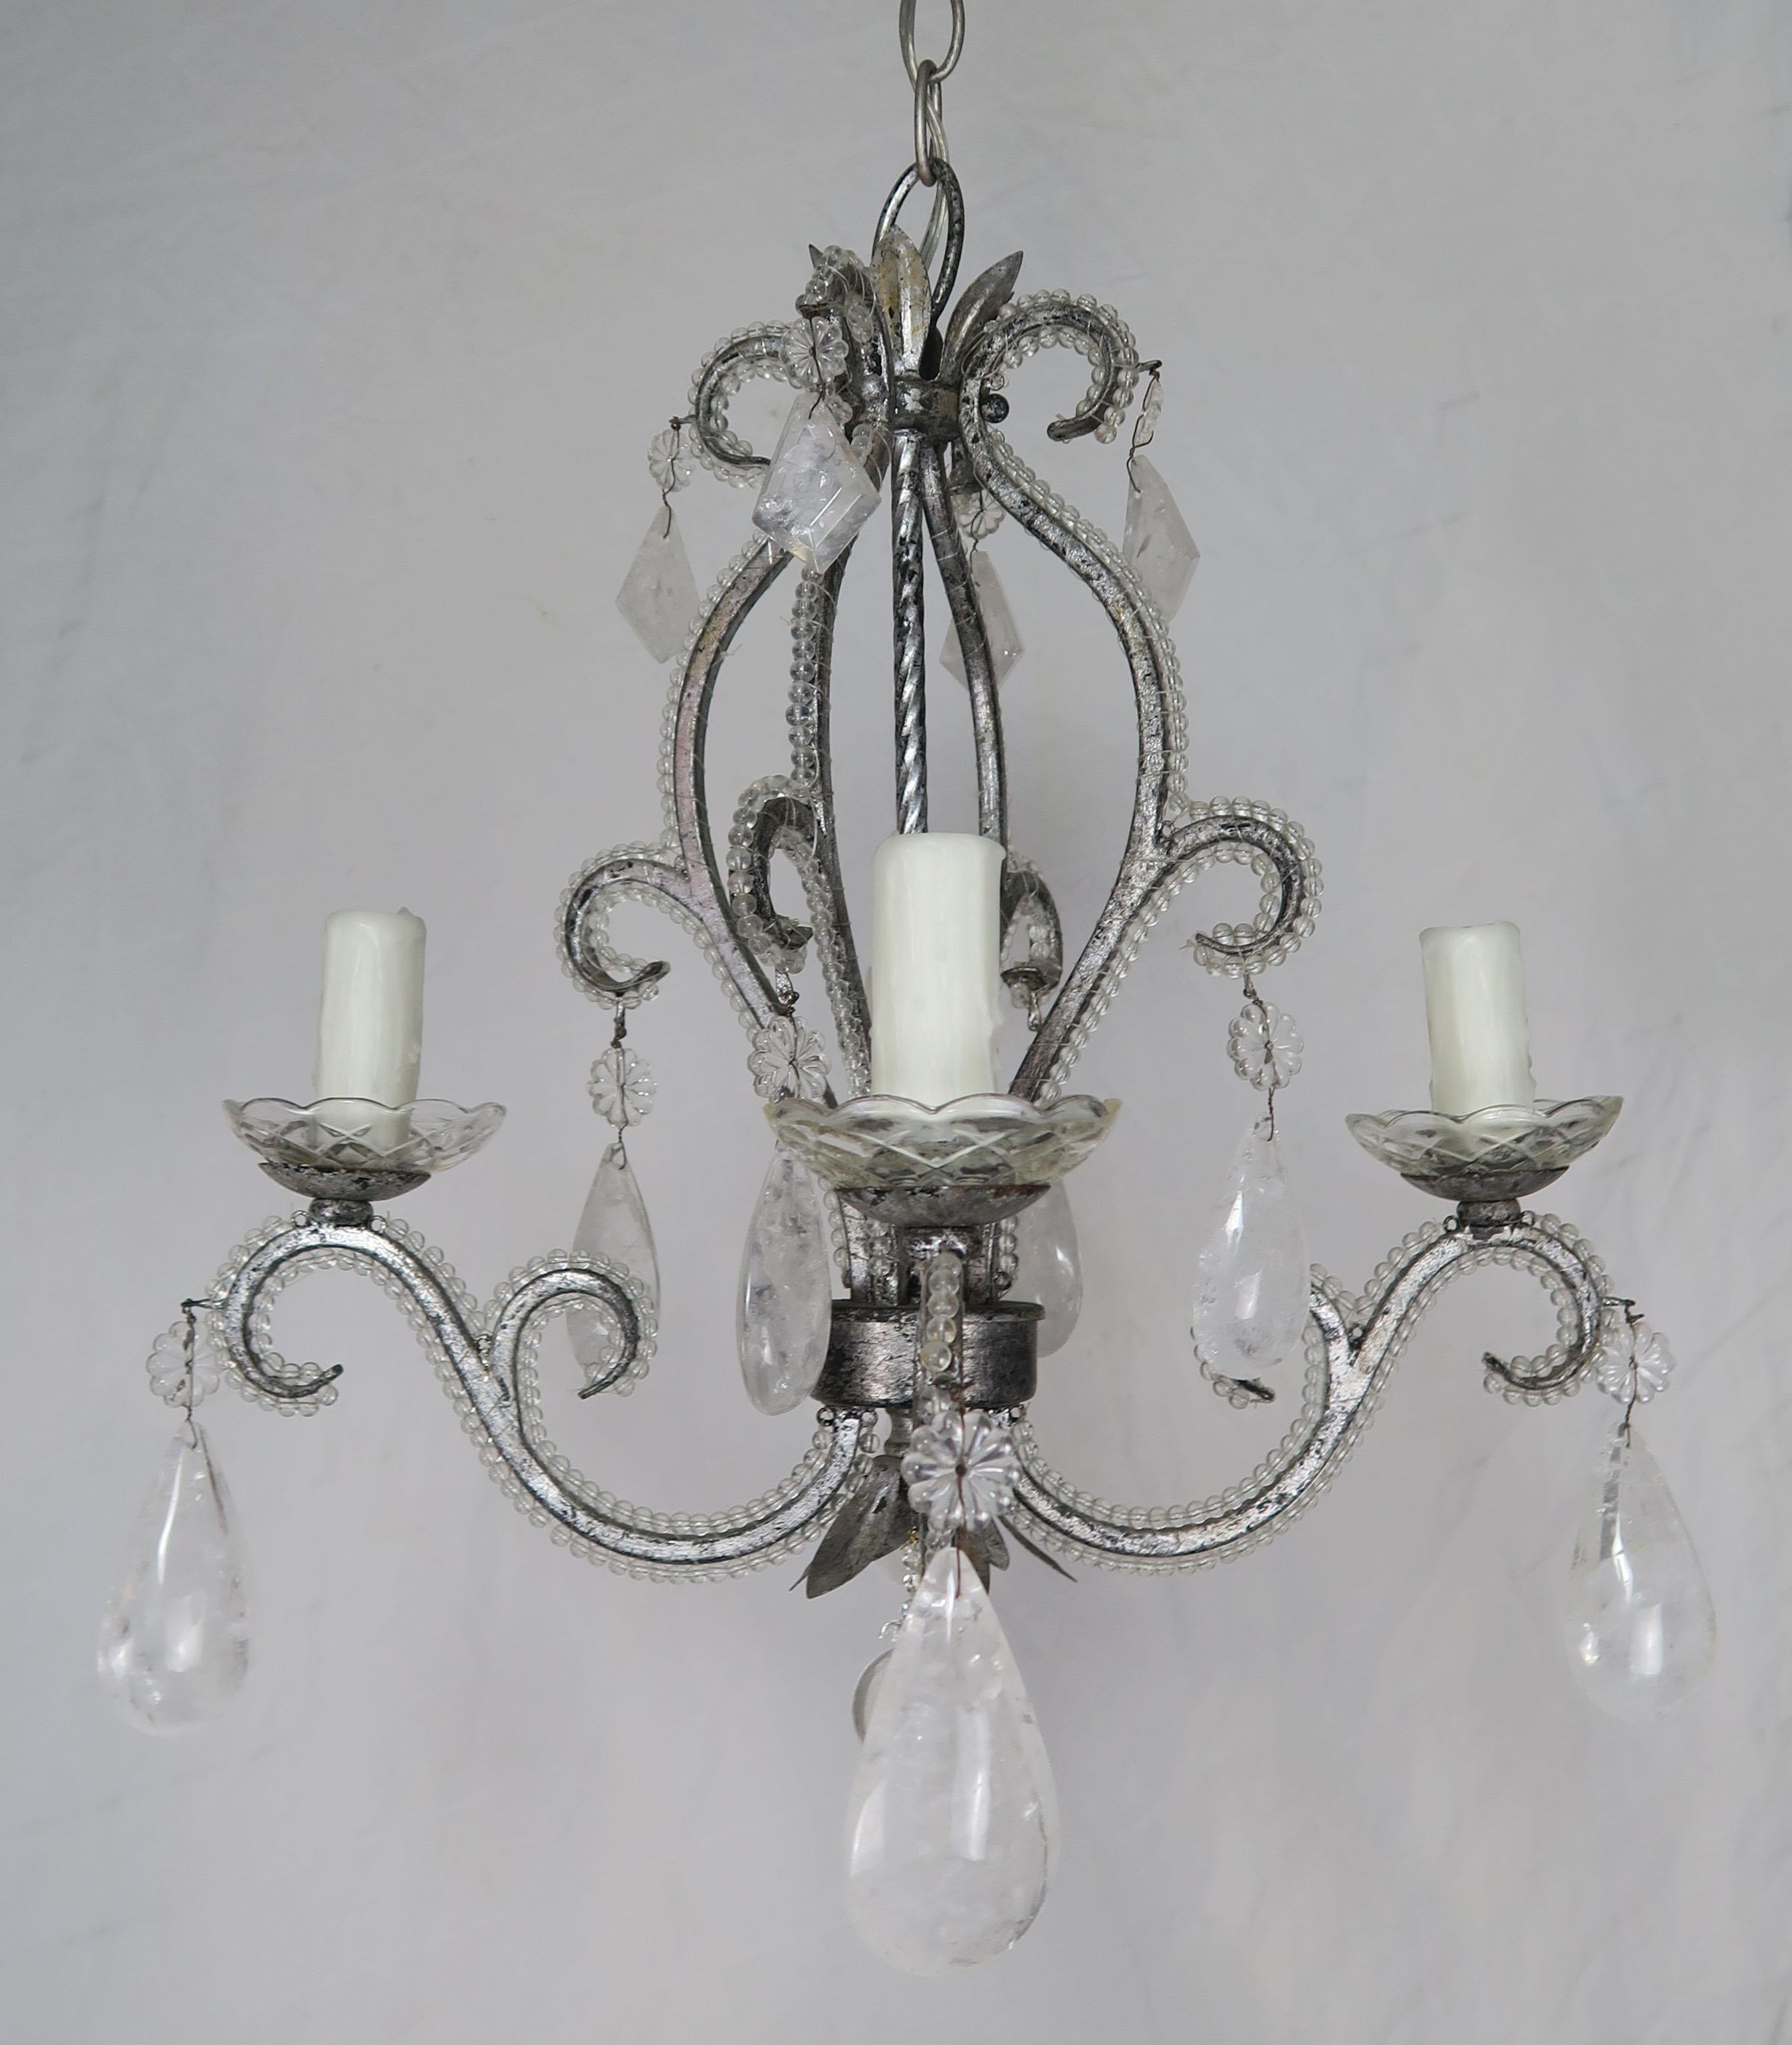 Rock crystal beaded pewter finished metal 4-light chandelier adorned with kite and almond shaped rock crystals throughout. The fixture is newly rewired with drip wax candle covers and includes chain and canopy.
 